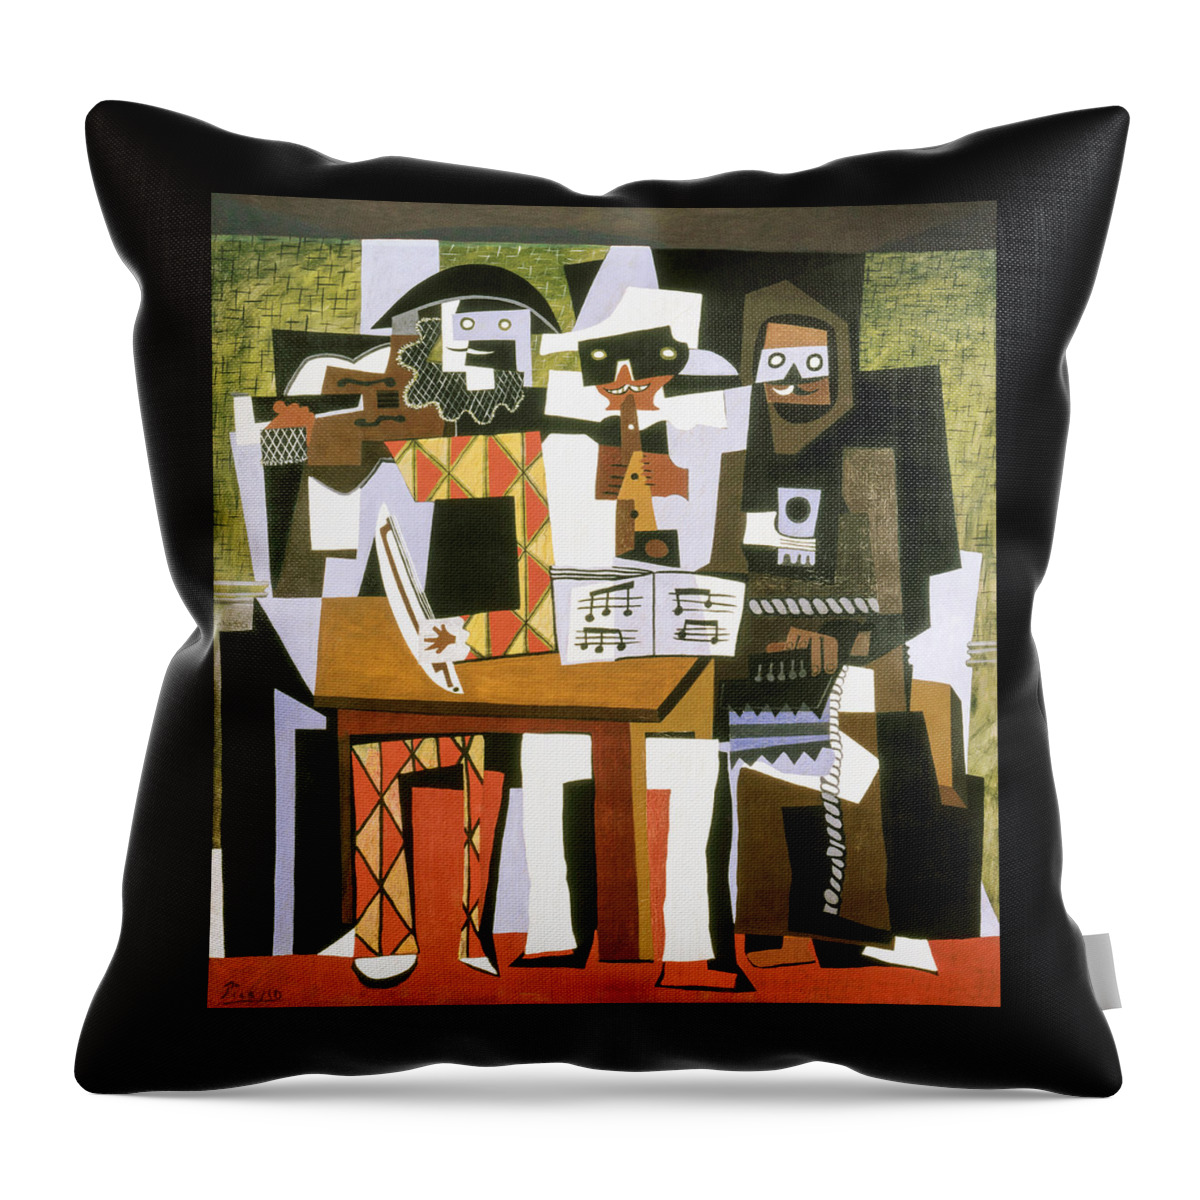 Three Musicians Throw Pillow featuring the painting Three Musicians by Pablo Picasso 1921 by Pablo Picasso